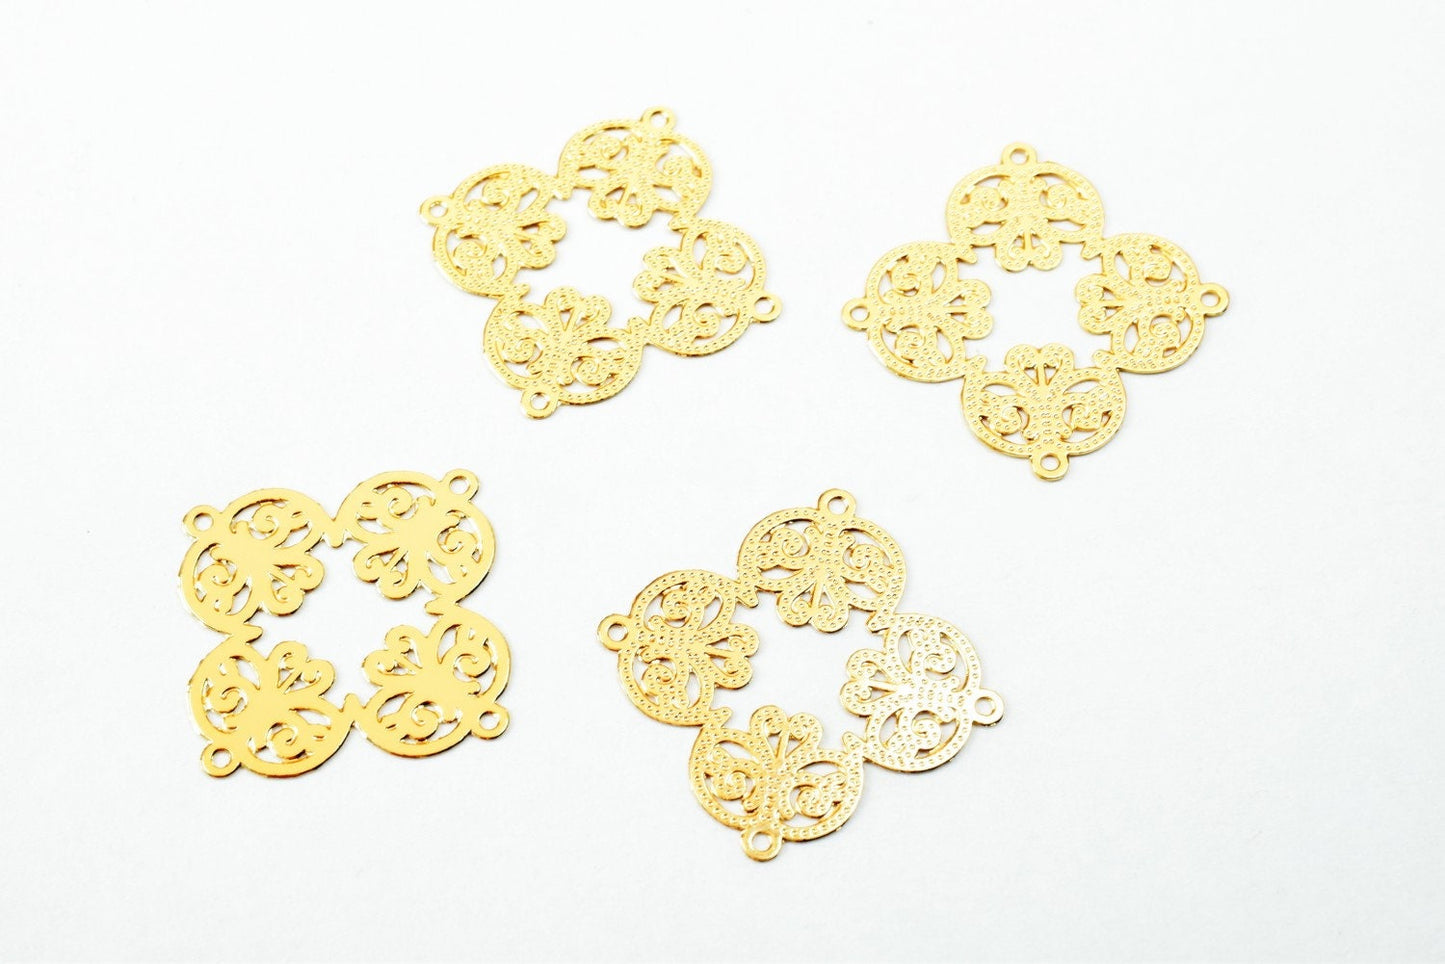 2 PCs Dainty Thin 18K Pinky as Gold Filled* Filigree Flower Connector Size 21x21mm Thickness 0.25mm For Jewelry Making DGF05